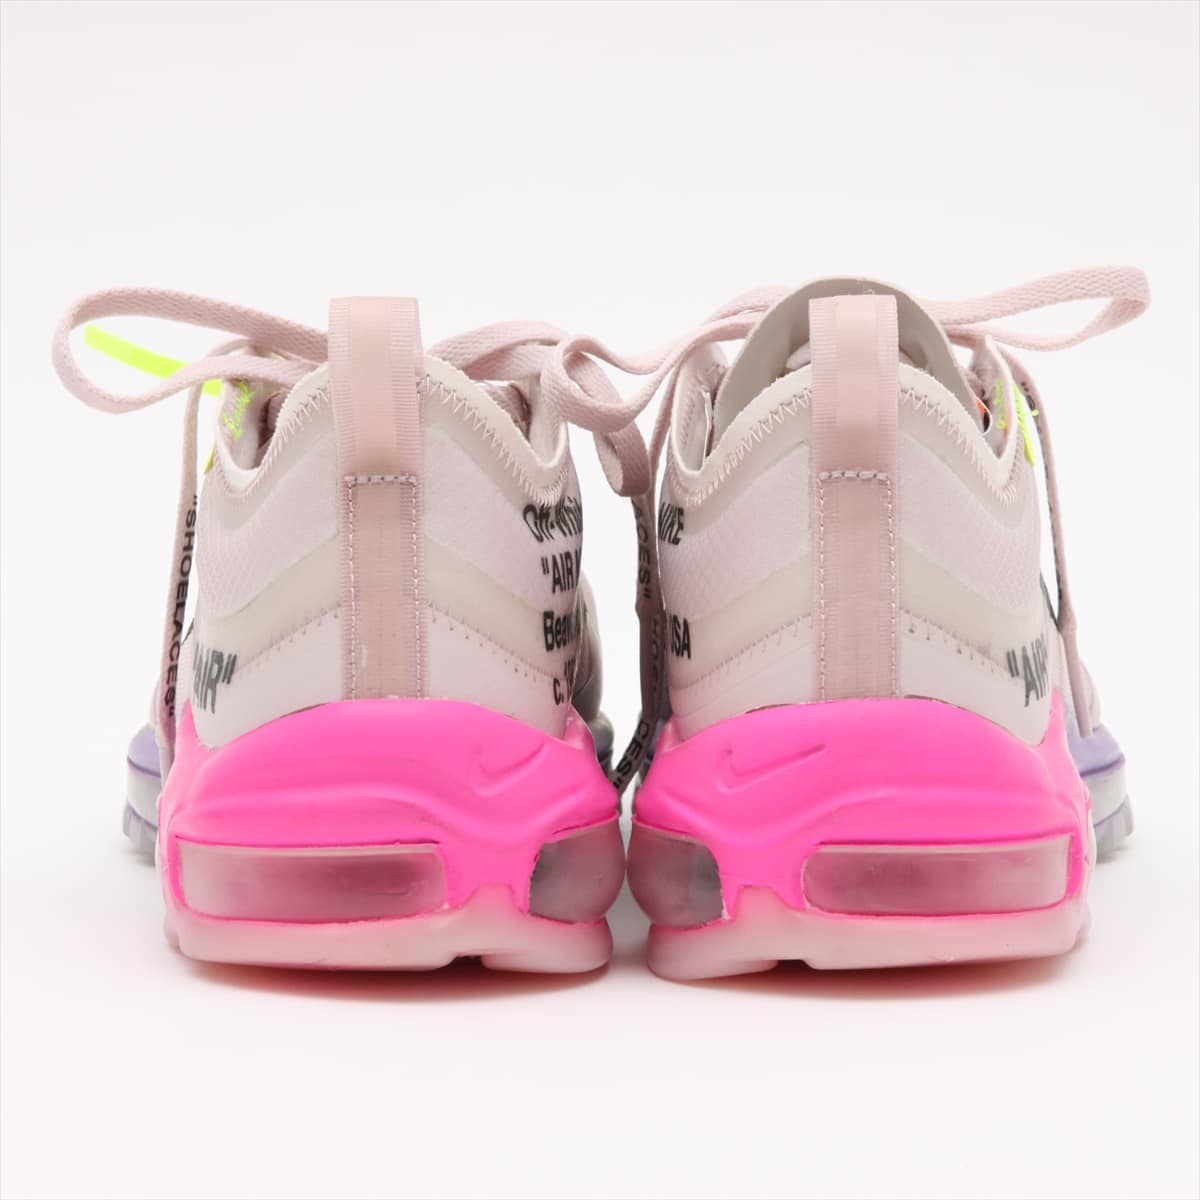 NIKE × OFF-WHITE 18AW Fabric Sneakers 26.0cm Men's Pink AIR MAX 97 OG Queen/Serena Williams AJ4585-600